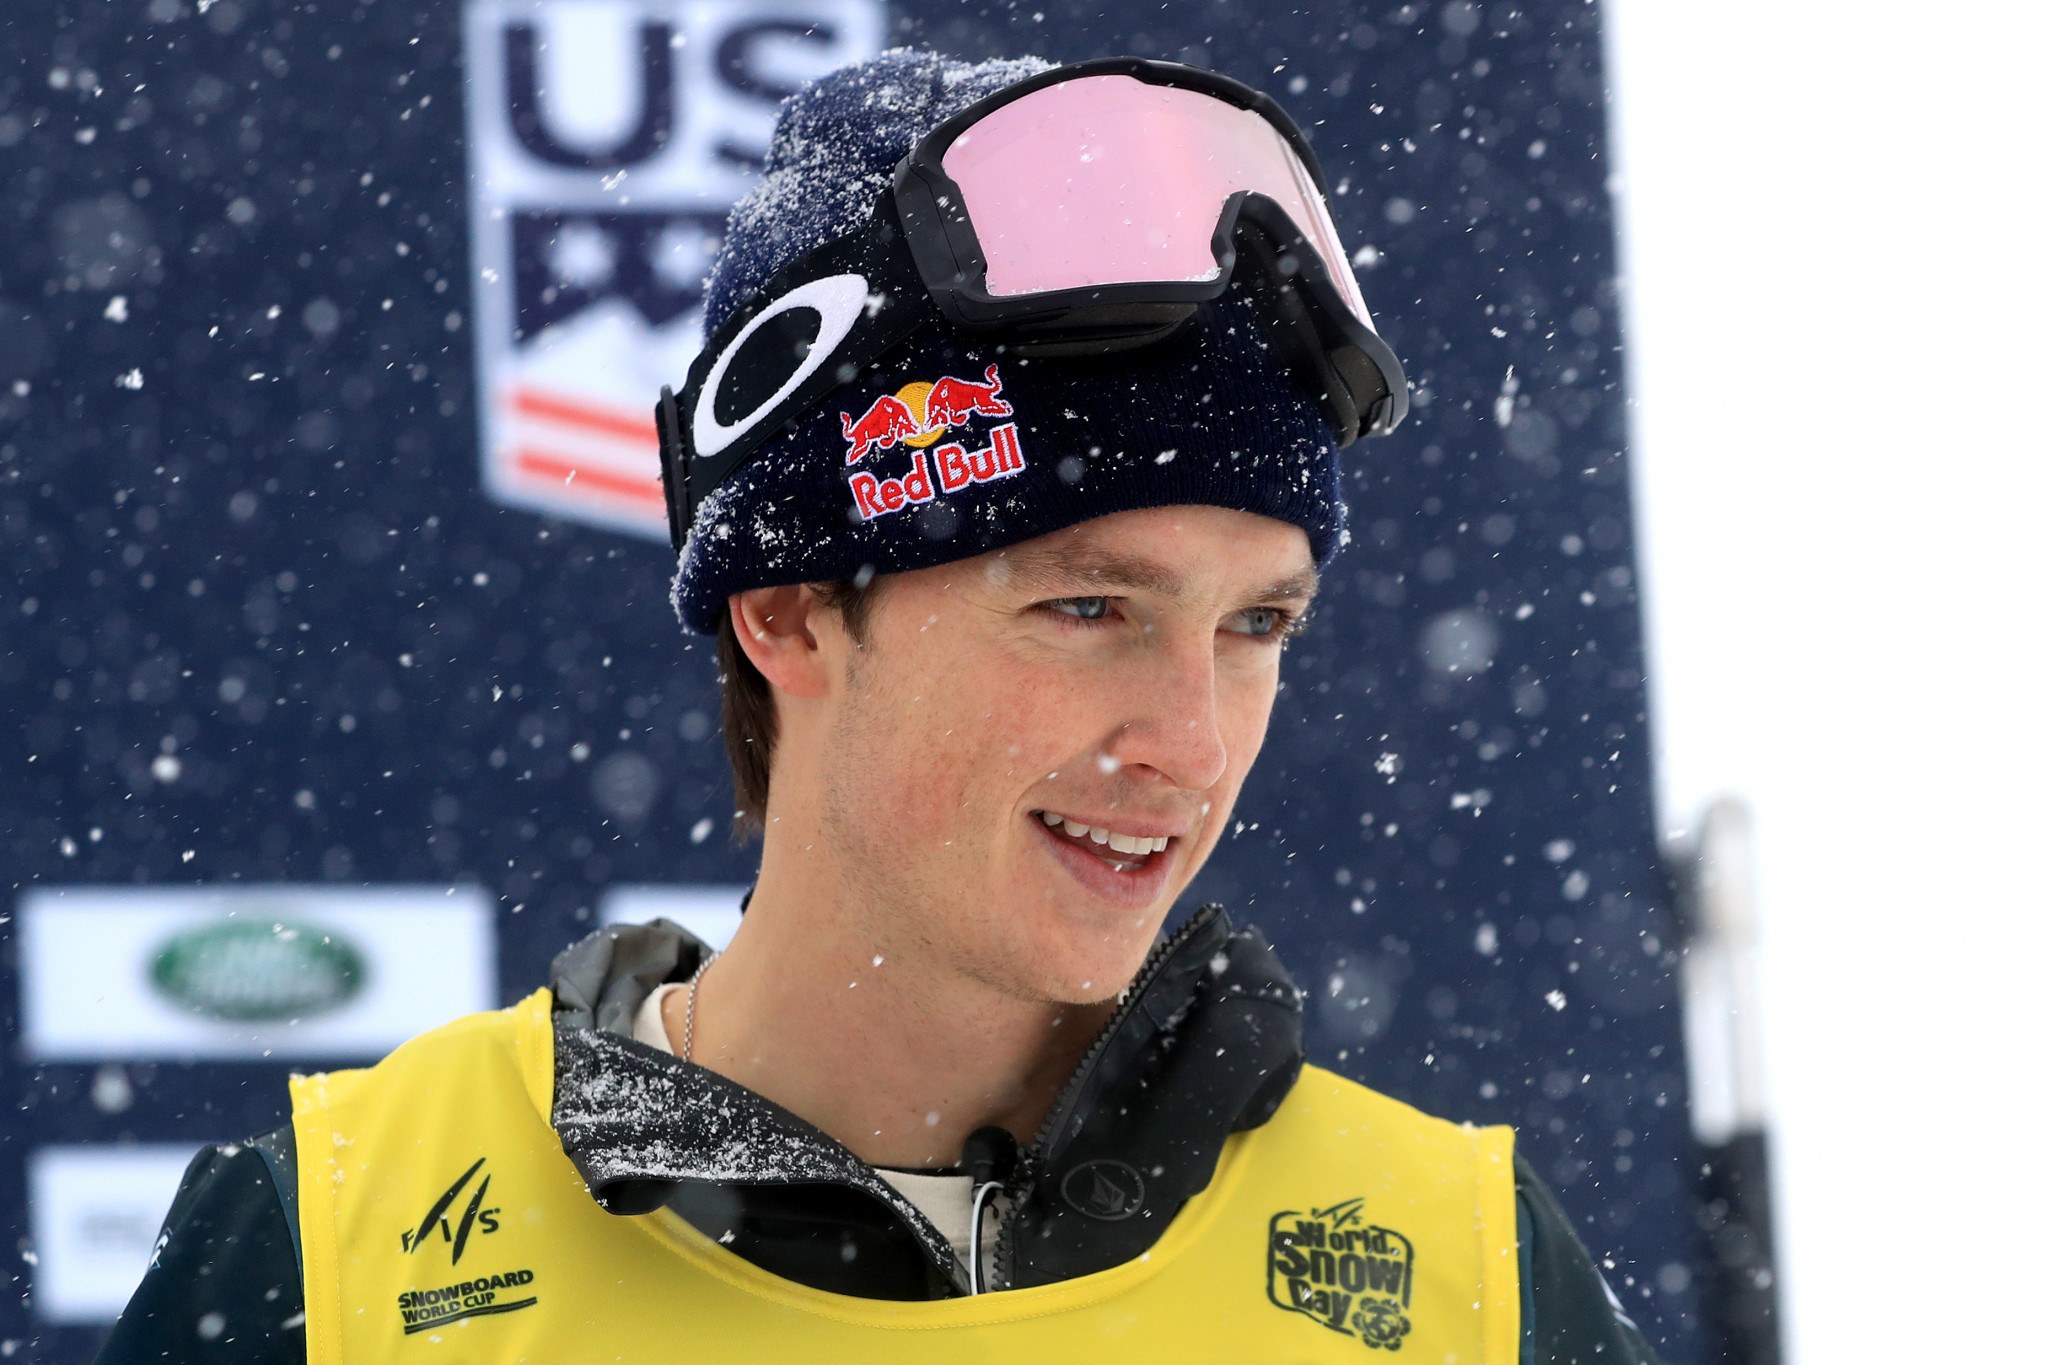 Scotty James will be one of the many winter sports superstars on show ©Getty Images